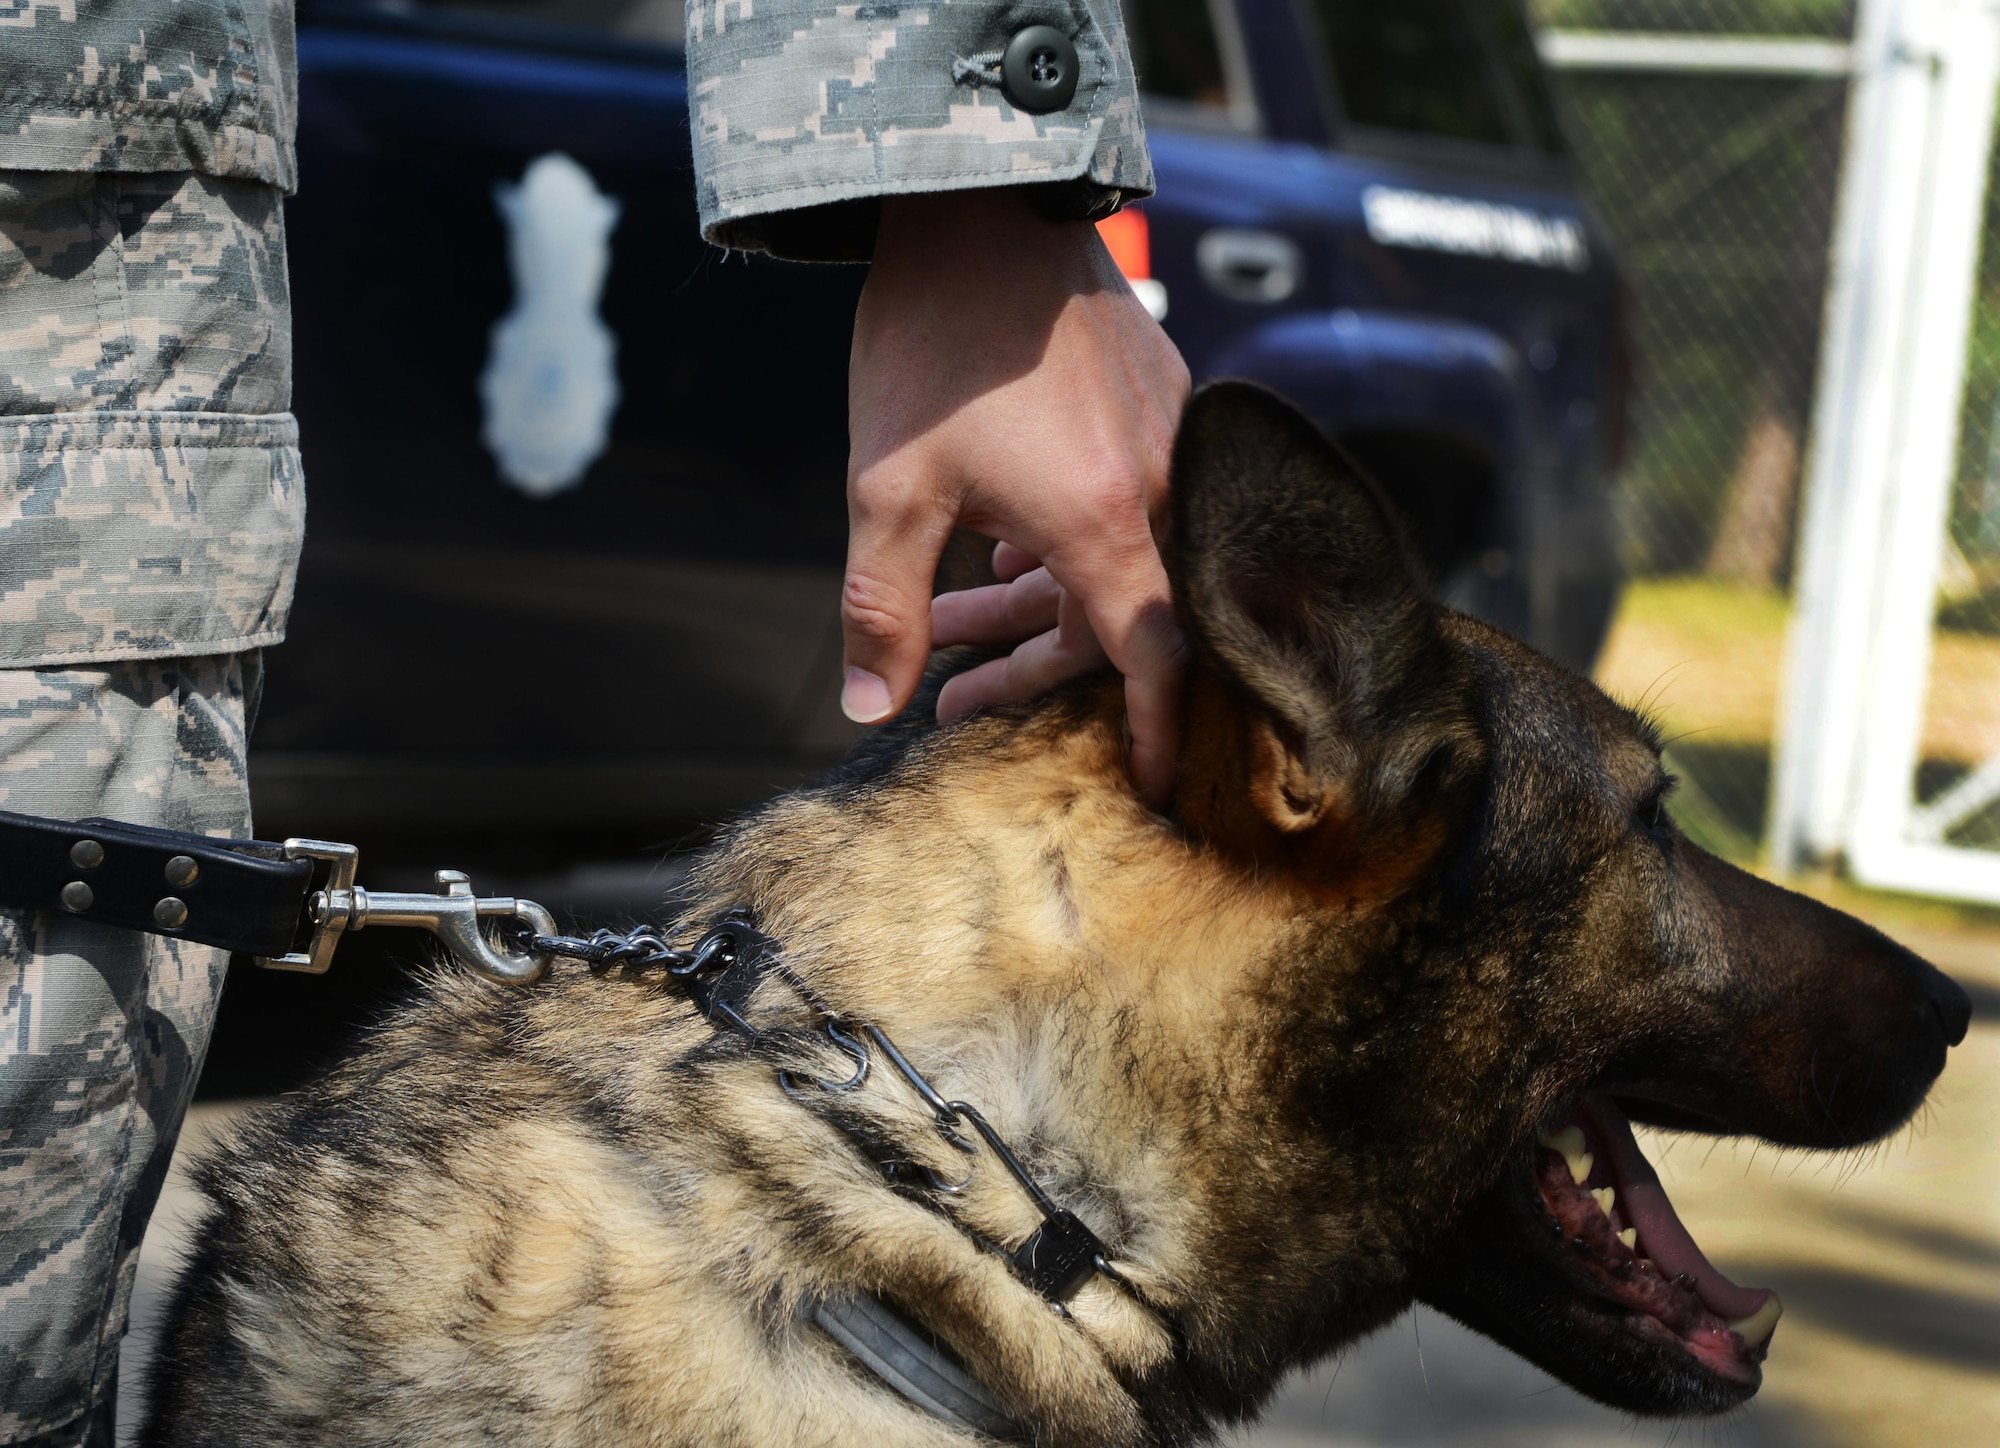 Staff Sgt. Timothy Norwood, 86th Security Forces Squadron military working dog handler, pets Charlie, 86th SFS MWD, Aug. 30, 2016 at Ramstein Air Base, Germany. The 86th SFS falls under the 86th Mission Support Group, which hosted an immersion tour for Brig. Gen. Richard G. Moore Jr., 86th Airlift Wing commander. (U.S. Air Force photo/Airman 1st Class Joshua Magbanua)